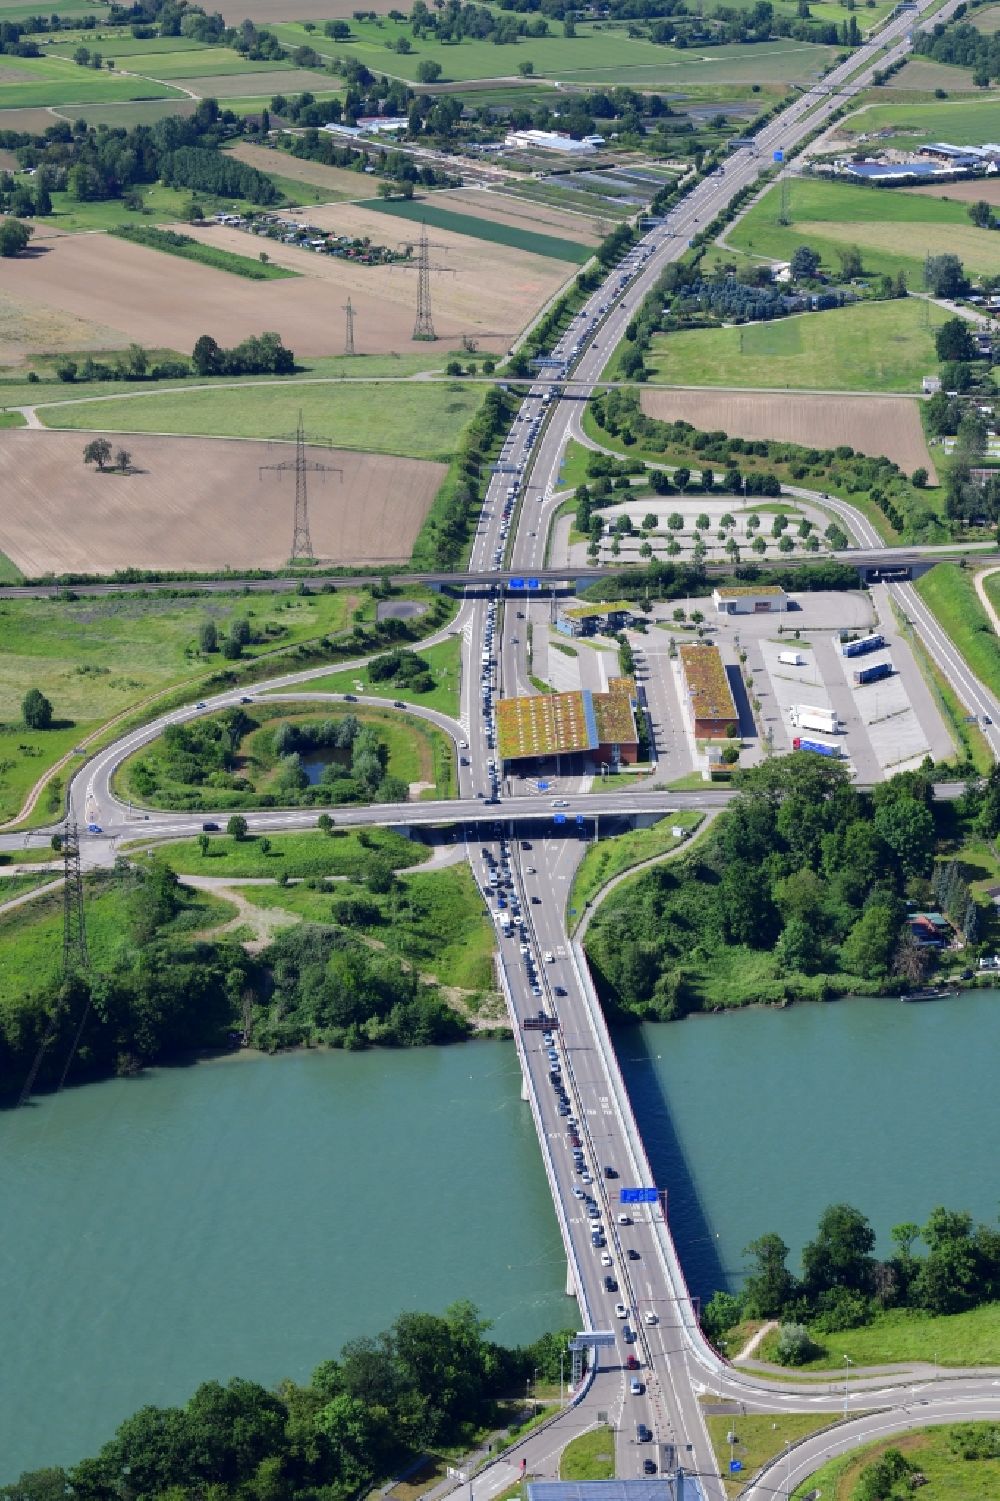 Rheinfelden (Baden) from the bird's eye view: Highway congestion along the route of the lanes of the motorway A861 over the Rhine bridge at the border and customs buildings of Switzerland and Germany in Rheinfelden in the canton Aargau, Switzerland and Germany, Baden-Wurttemberg